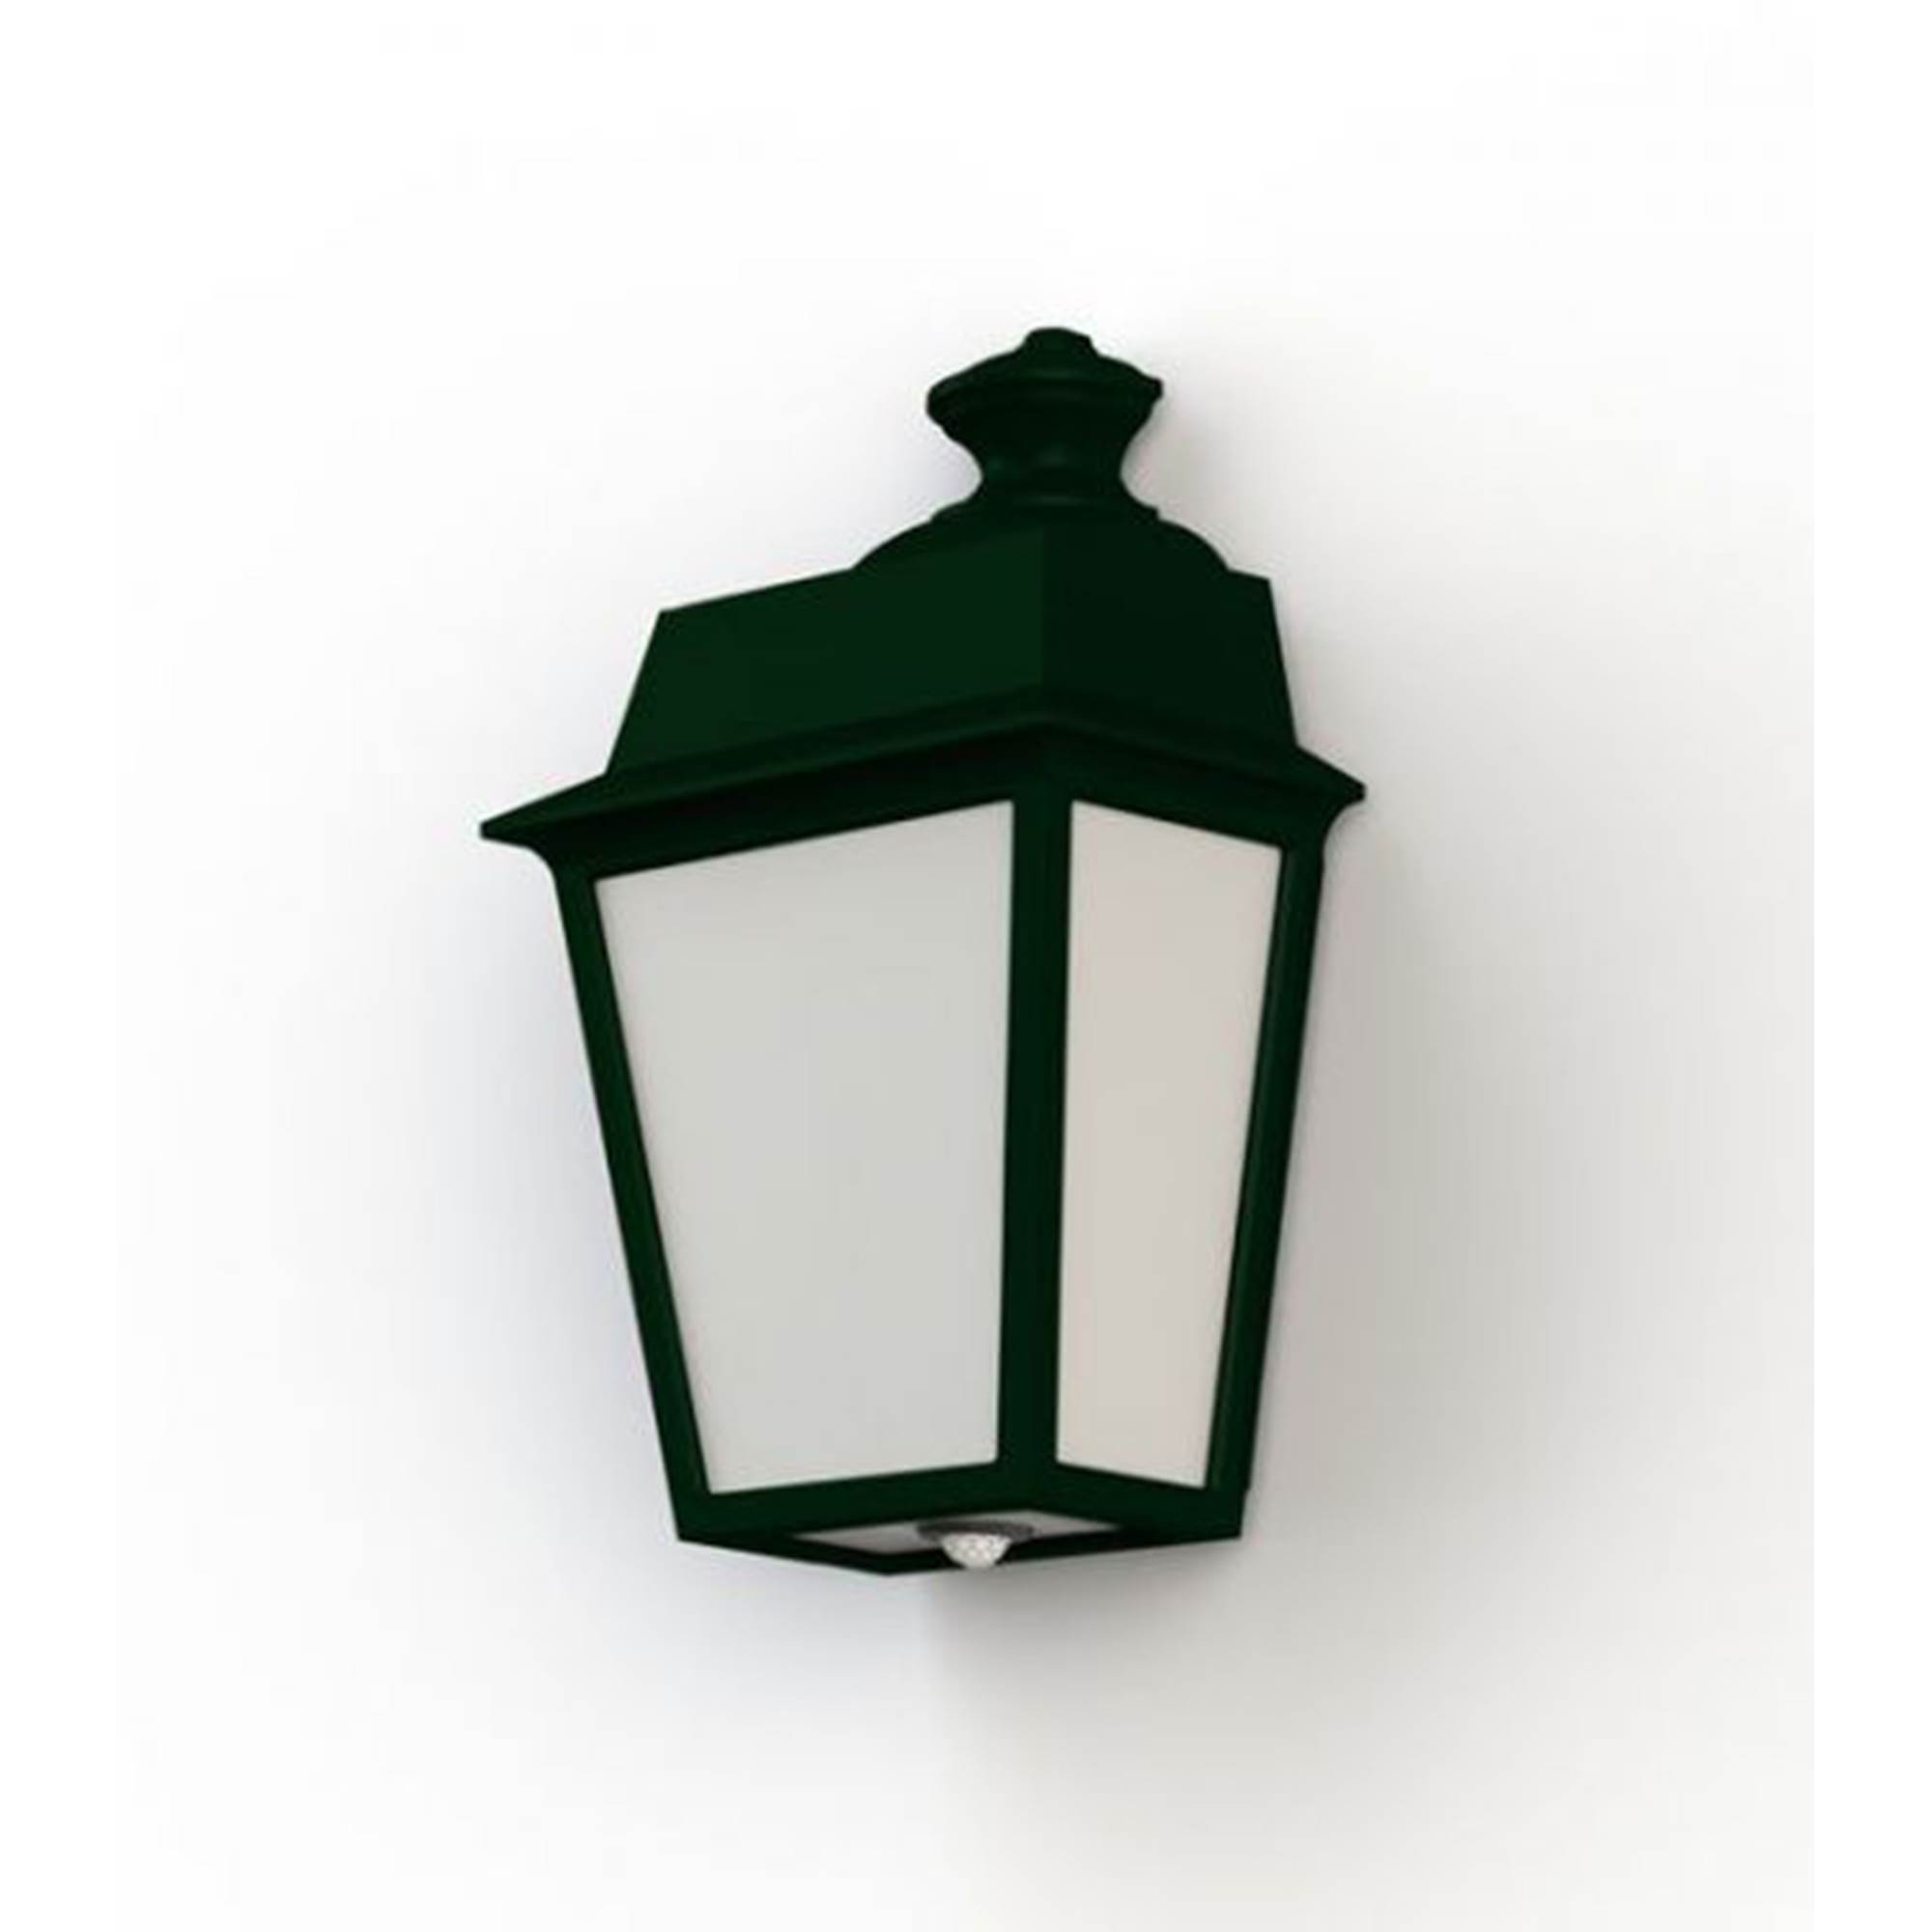 Roger Pradier Place des Vosges 1 Evolution Model 2 Opal Glass E27 Wall  Light with Injection-Moulded Aluminium - Fir Green